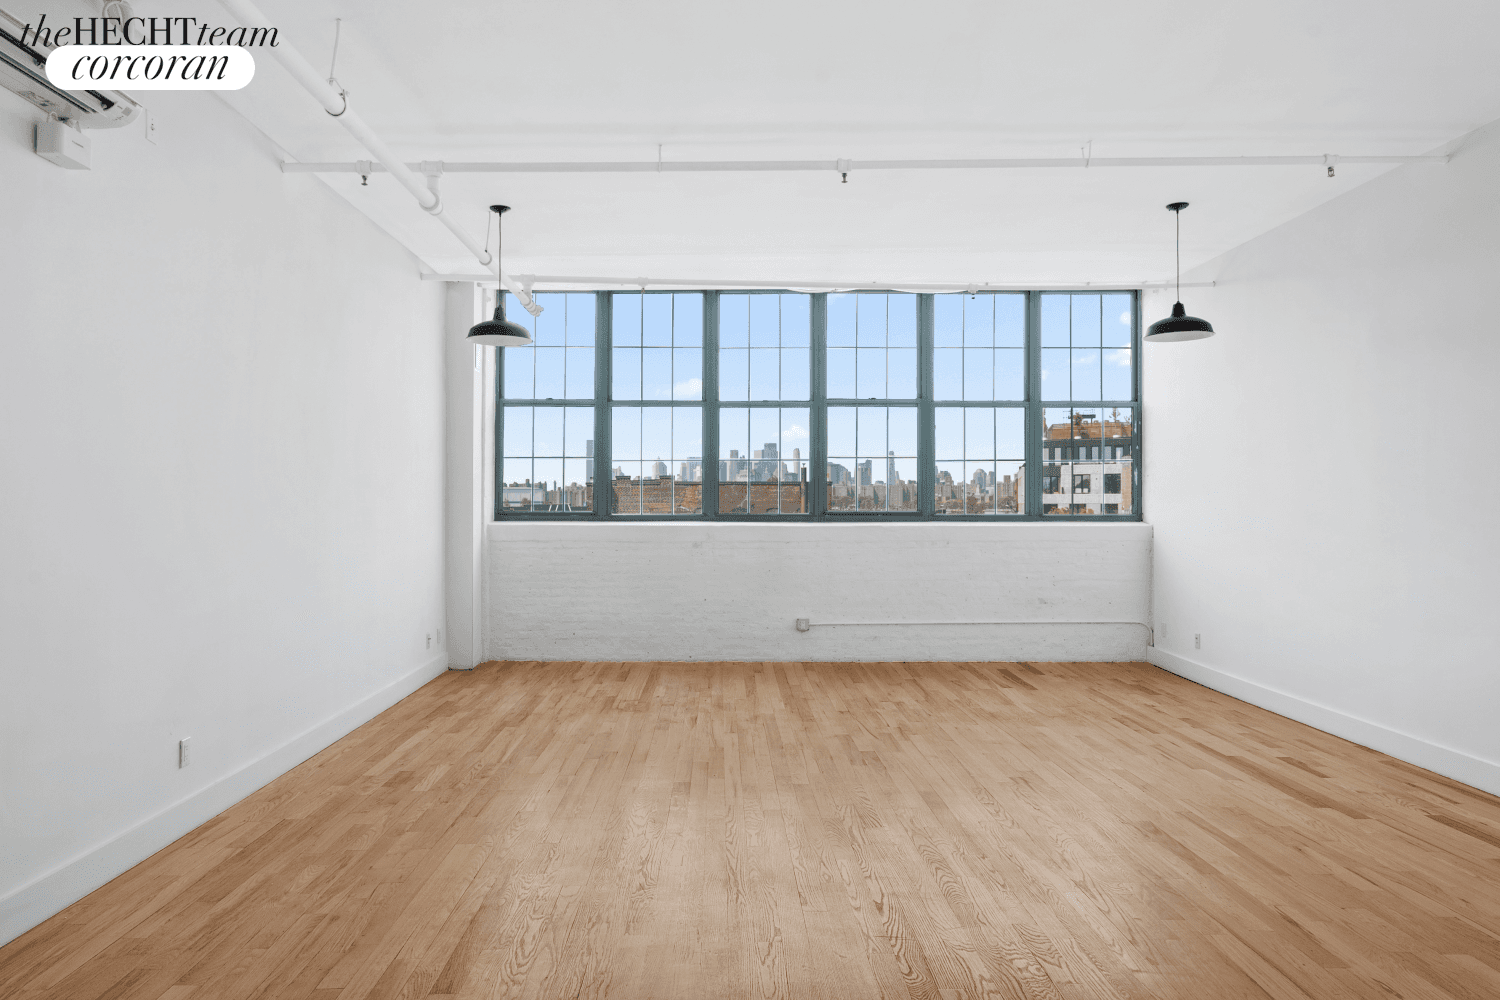 Experience loft living at its finest in the heart of Greenpoint, Brooklyn.